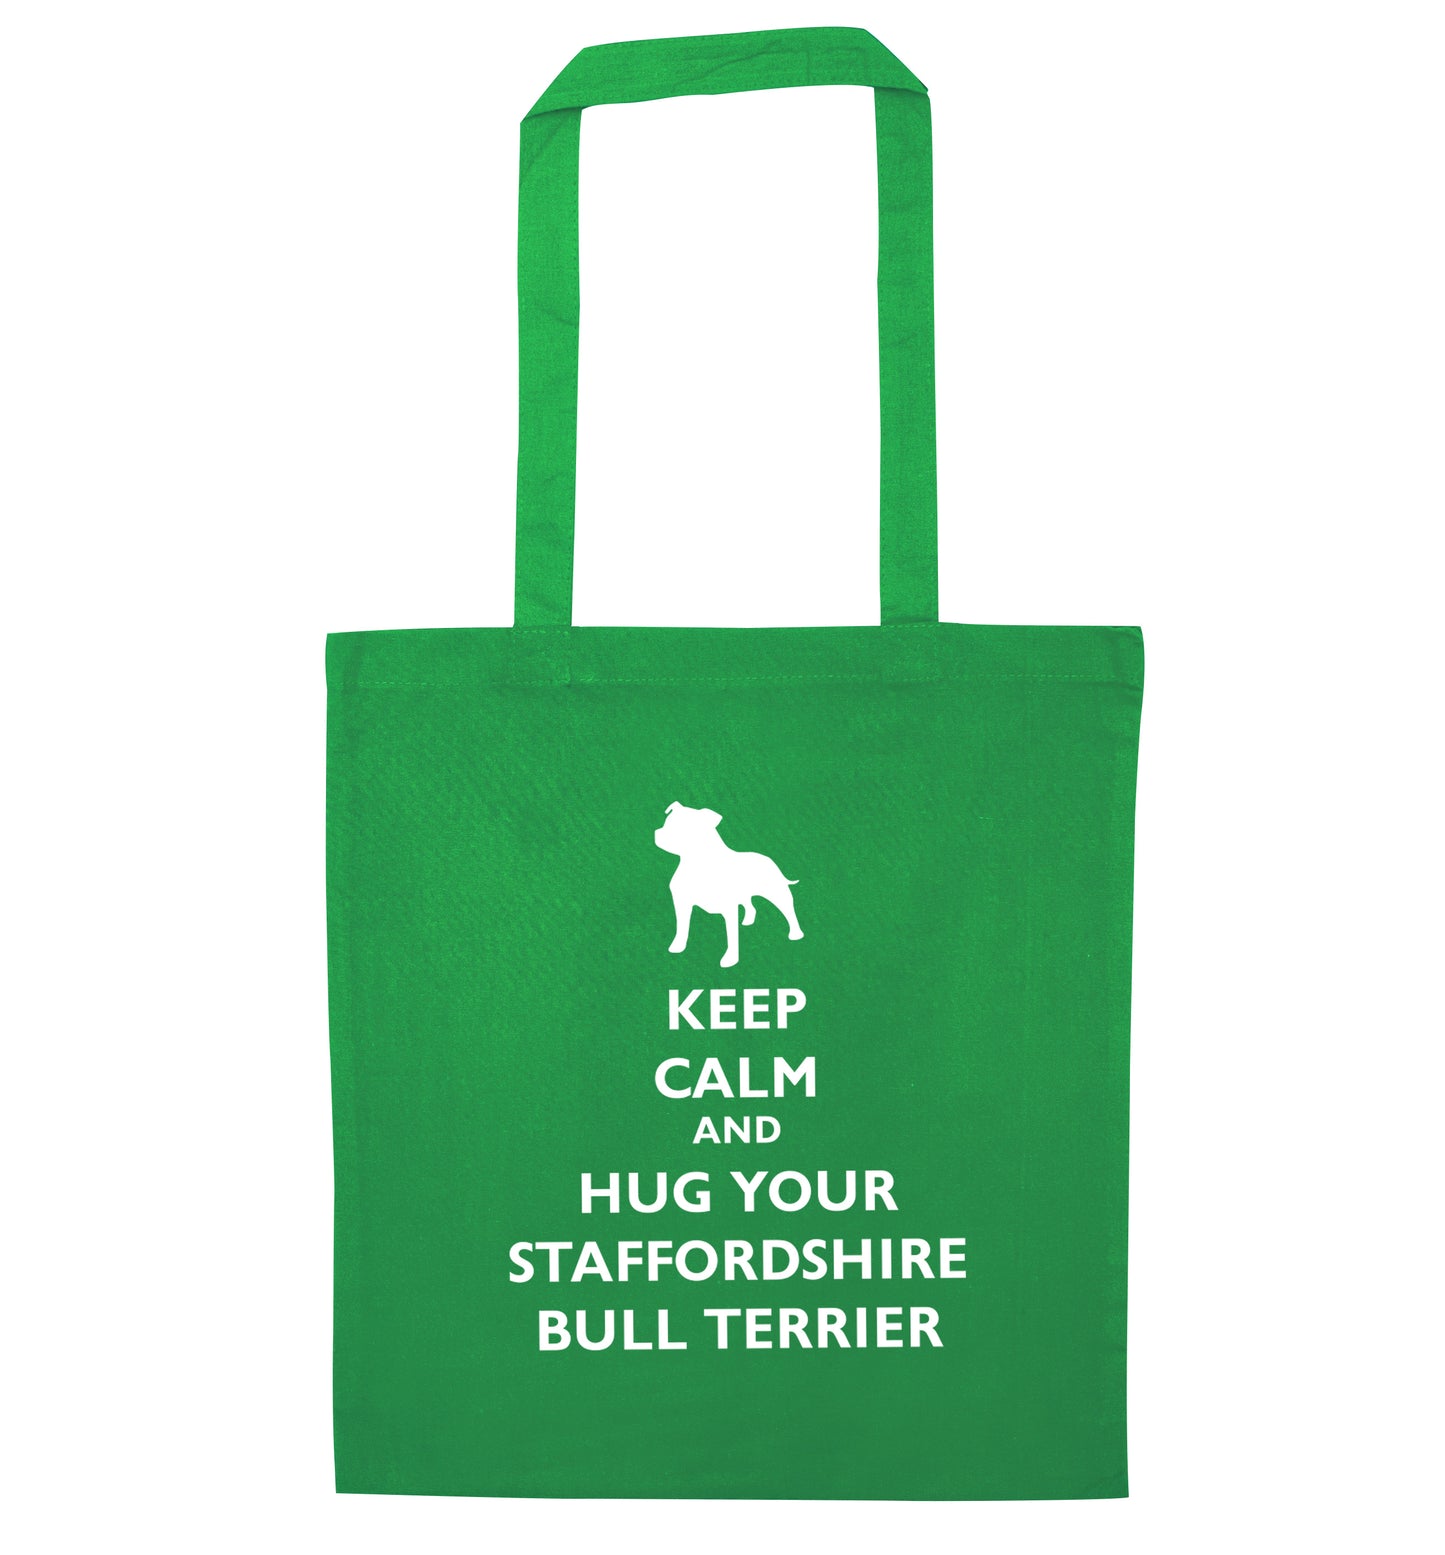 Keep calm and hug your bull terrier  green tote bag